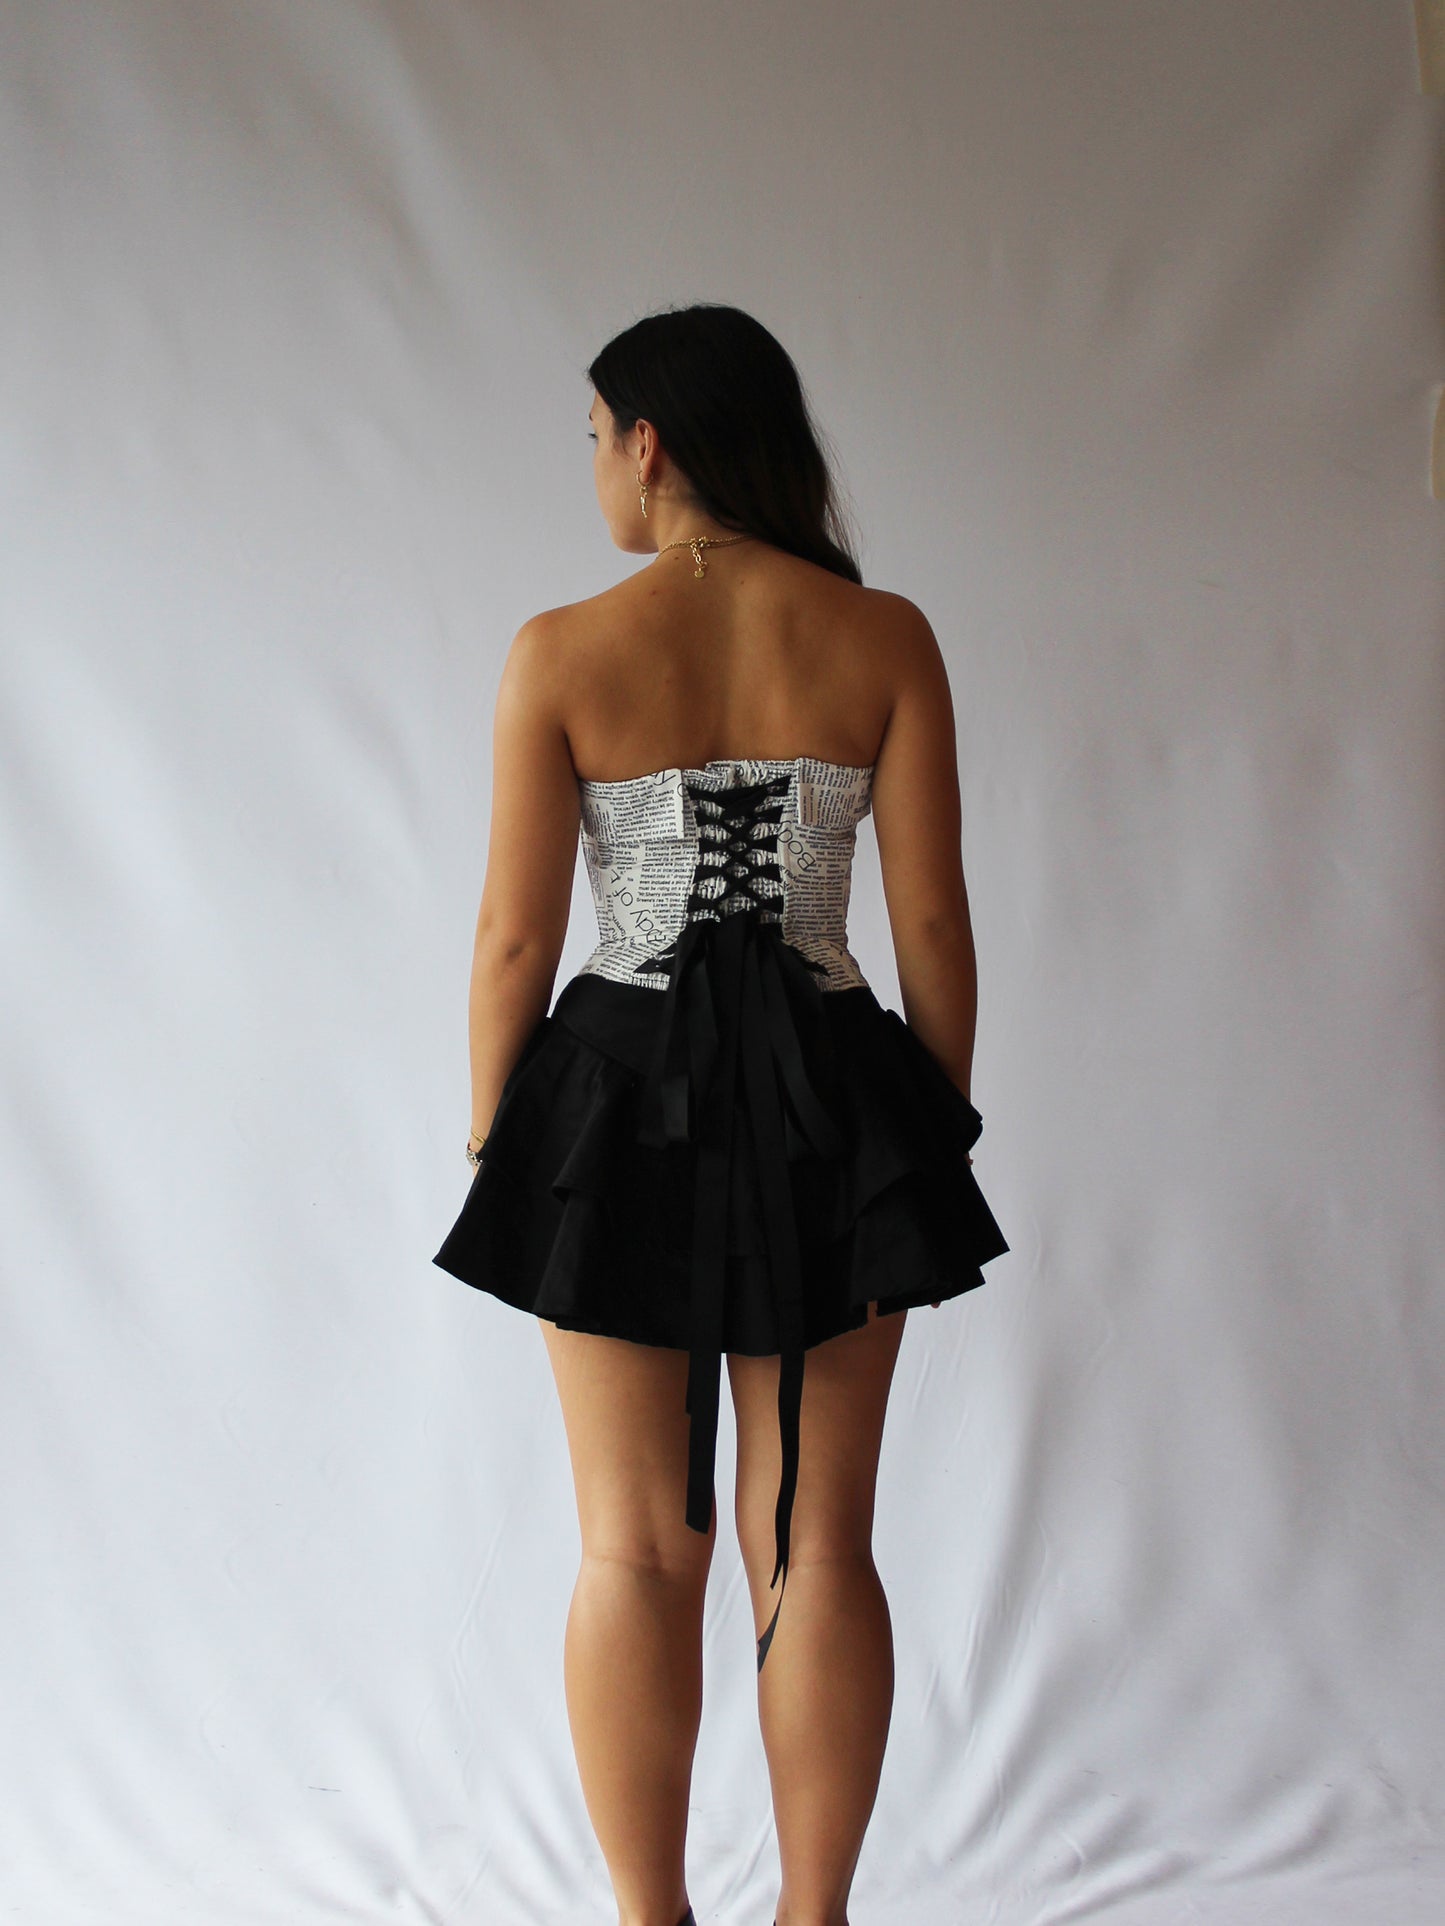 NEW Corset Strapless Newspaper Top Only - pre-orders for early June restock